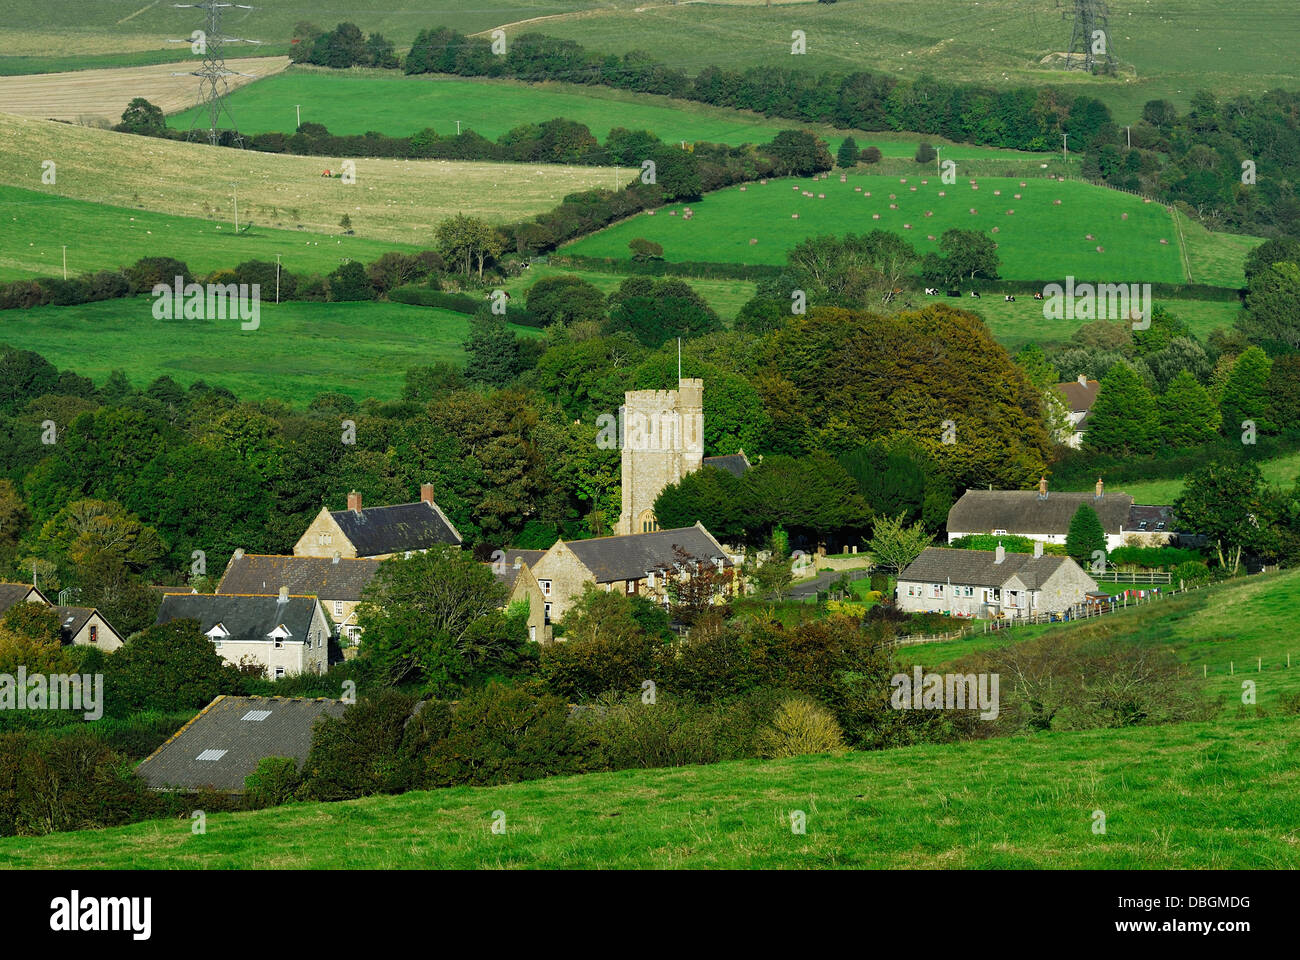 A view of the village and farmland at Askerswell  Dorset UK Stock Photo